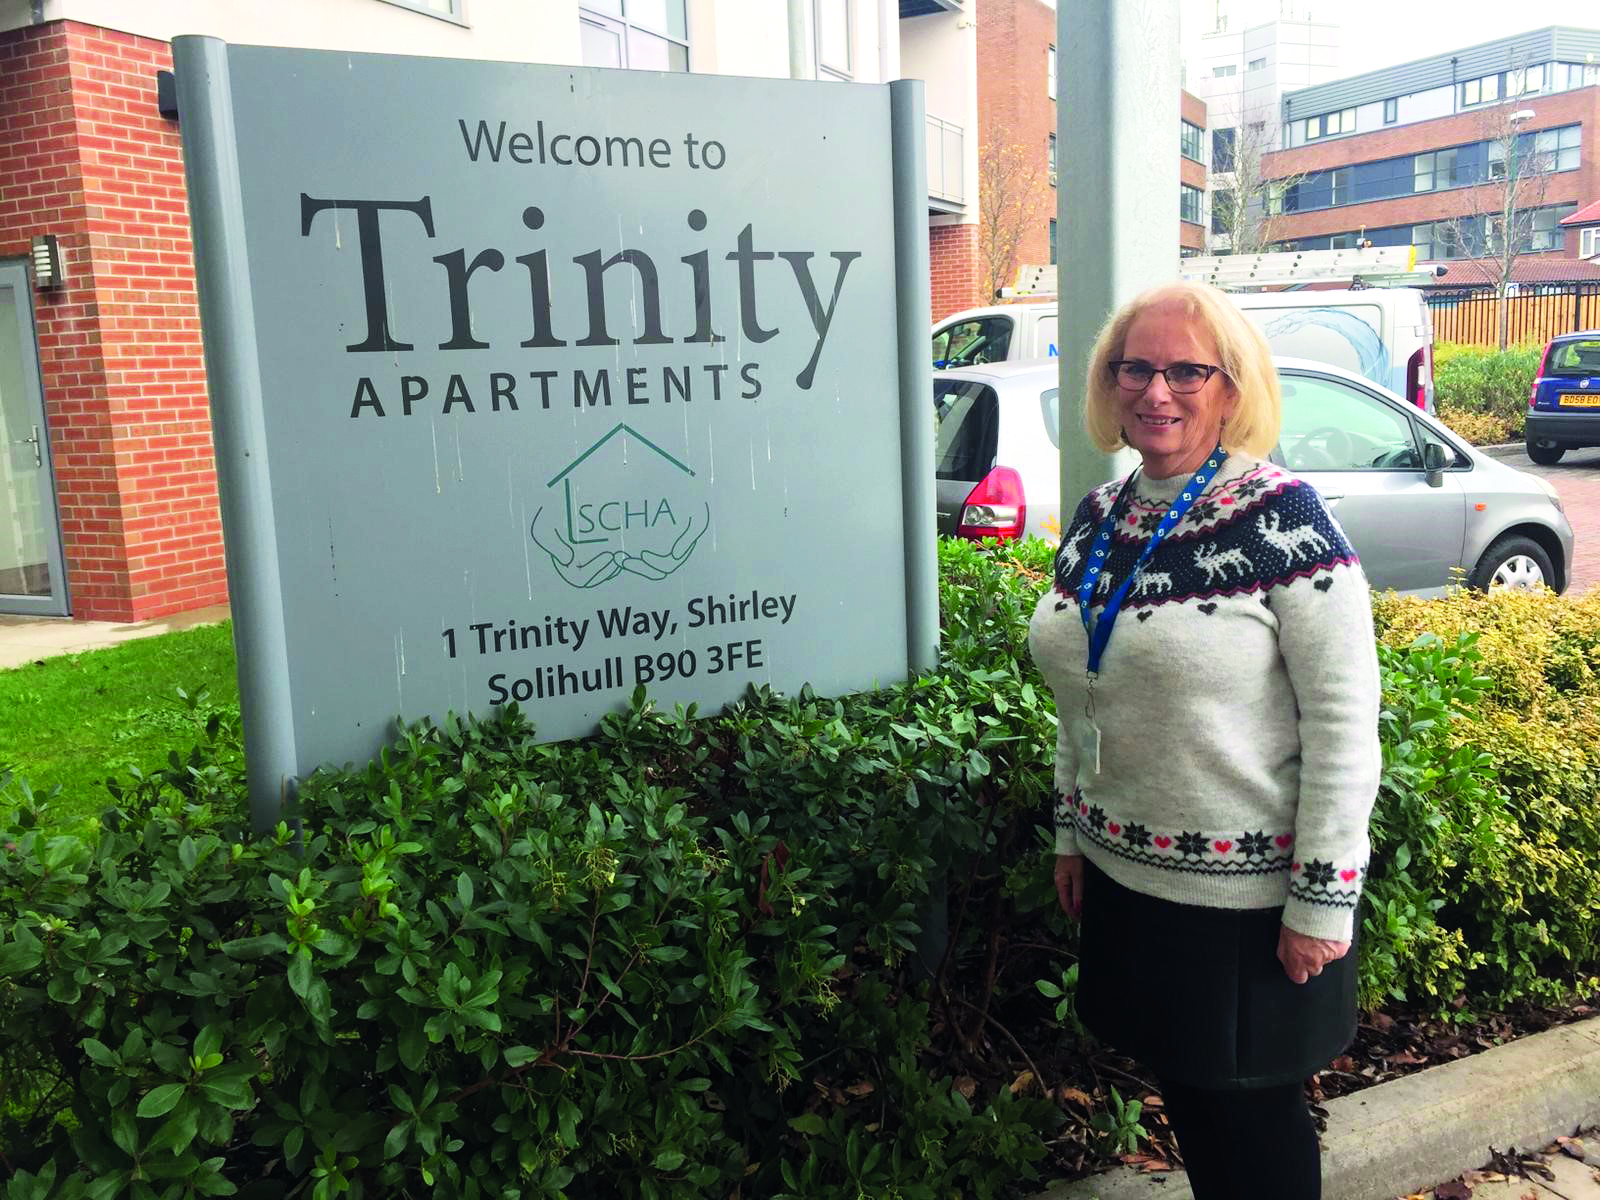 Jo Marsden, Longhurst Group's Community Engagement Support Worker at Trinity Apartments, our purpose-built extra care facility near Birmingham